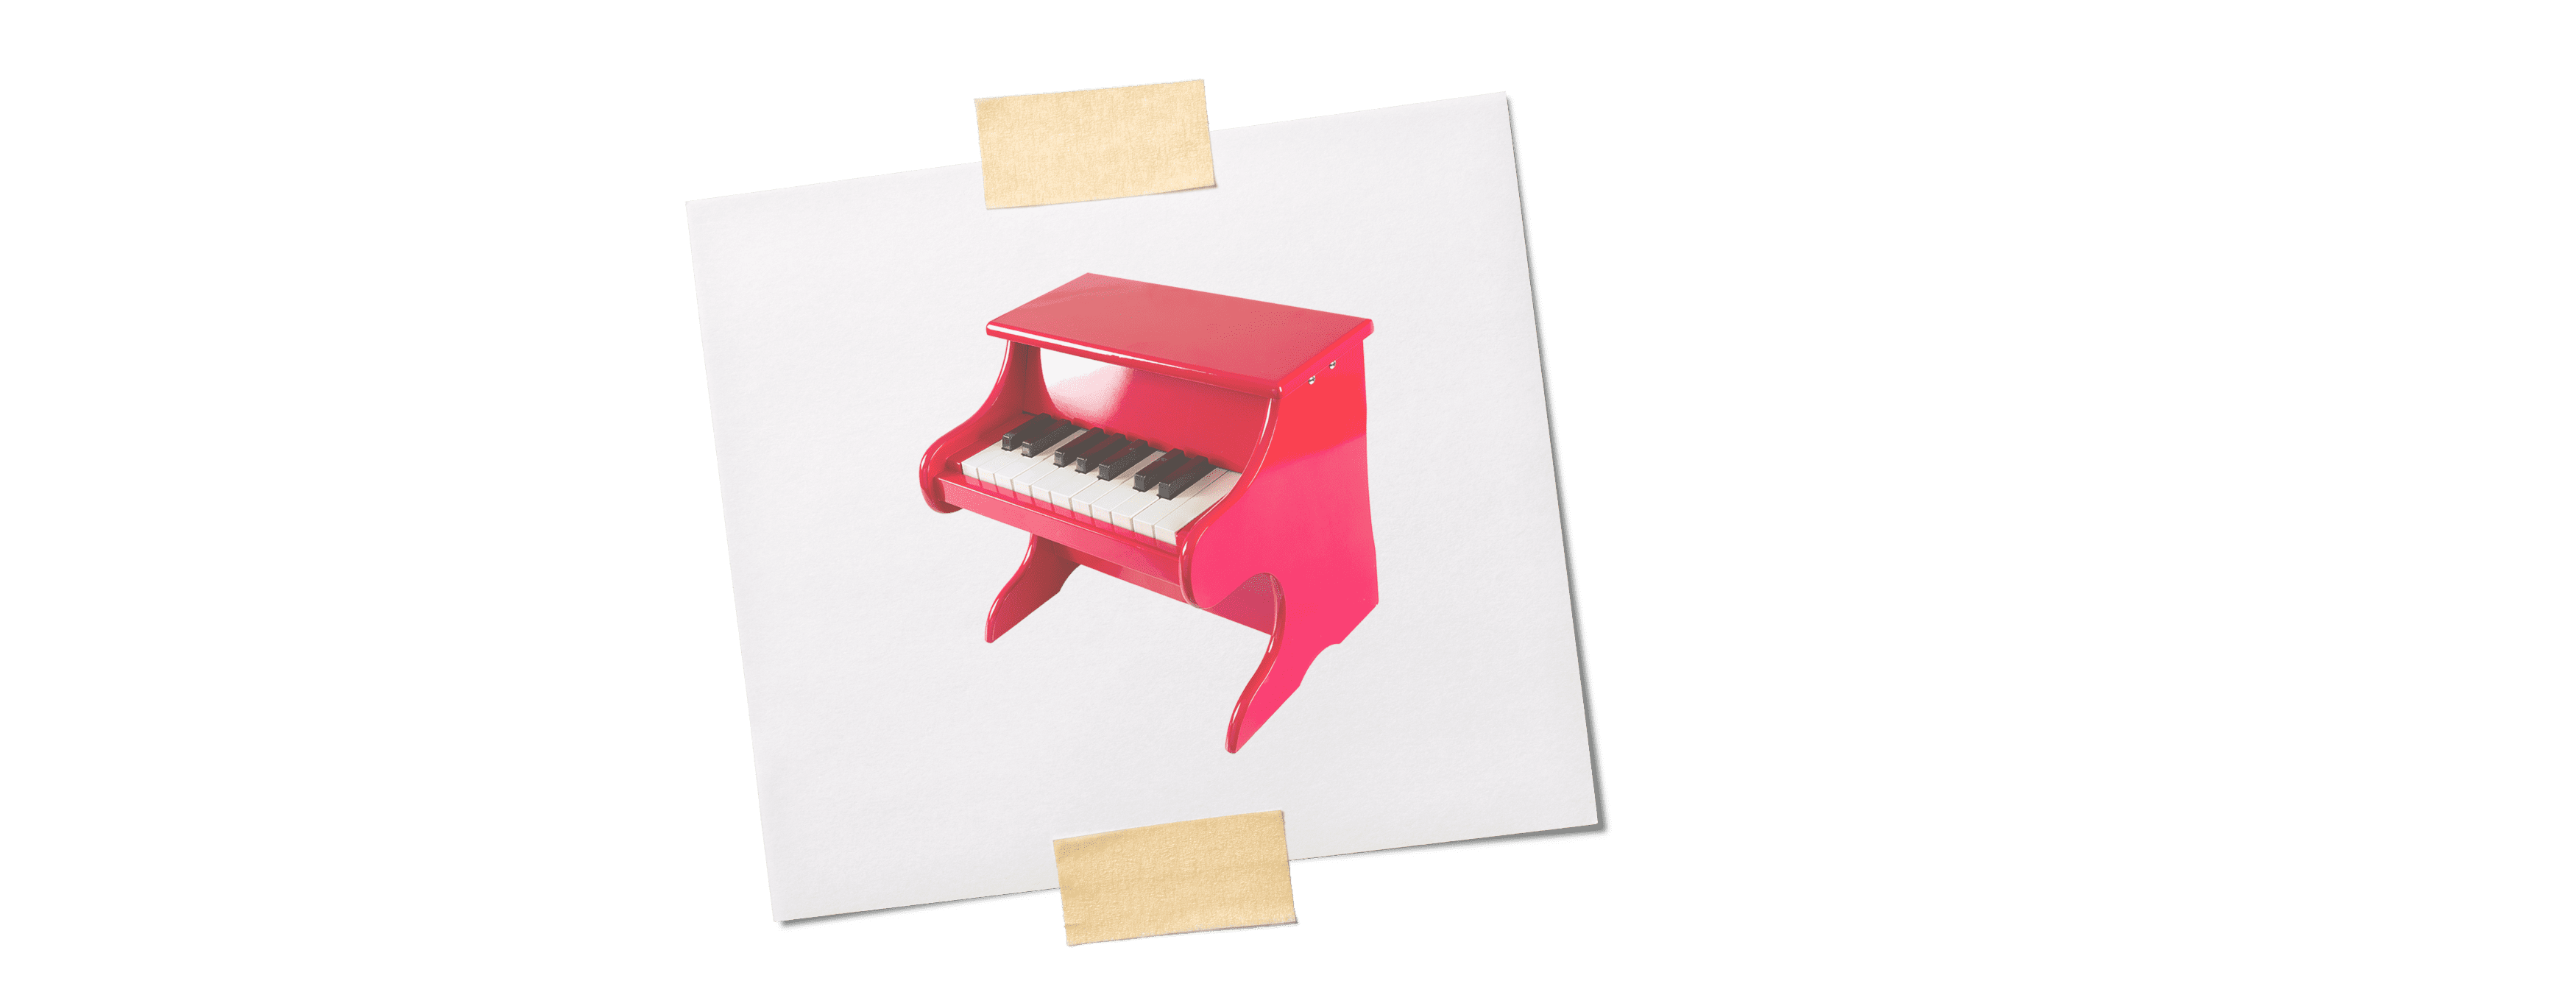 Misfit Toy Piano